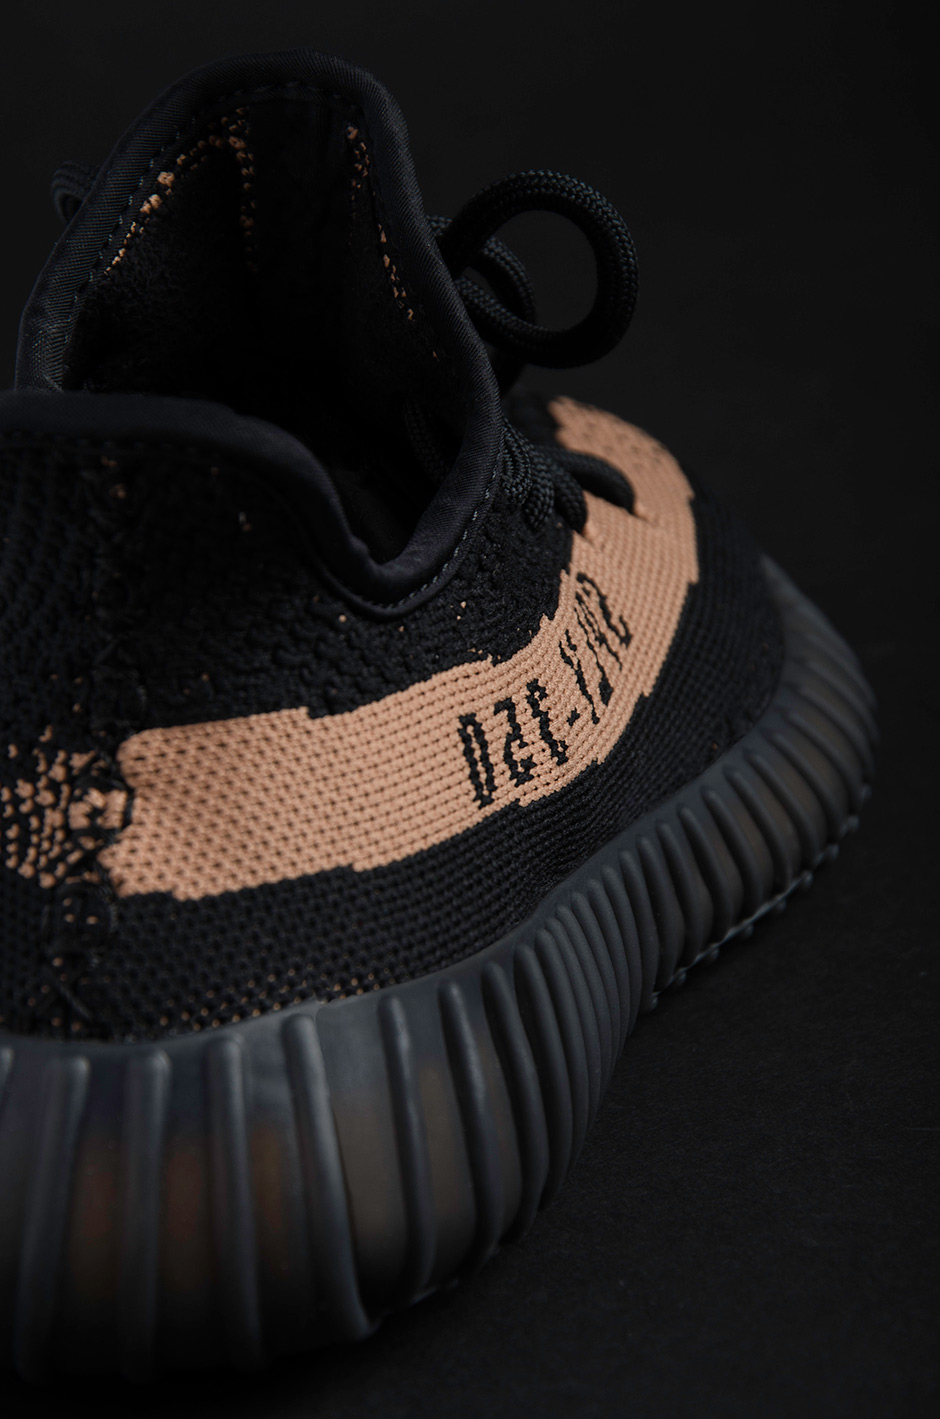 Yeezy Boost 350 v2 Copper BY1605 